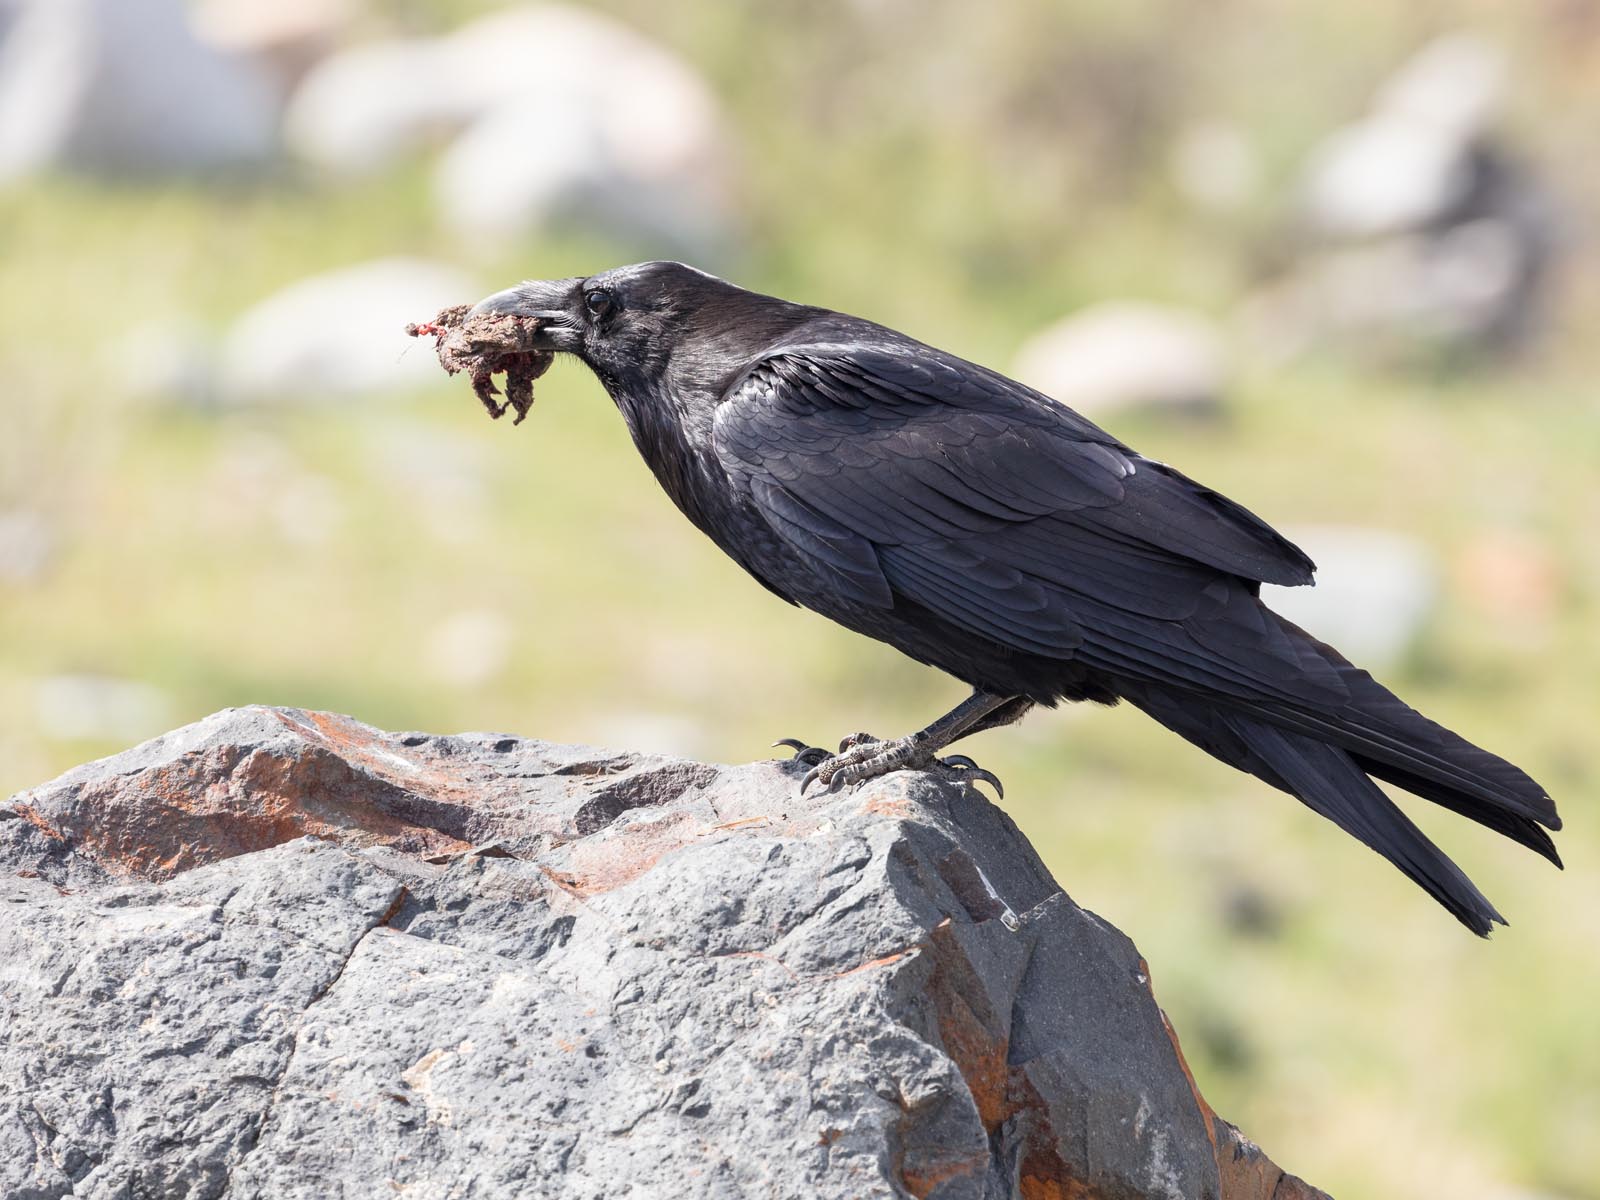 A Raven Scavenges a Frog, Yellowstone National Park, Wyoming | Photo Credit: Jacob W. Frank, NPS